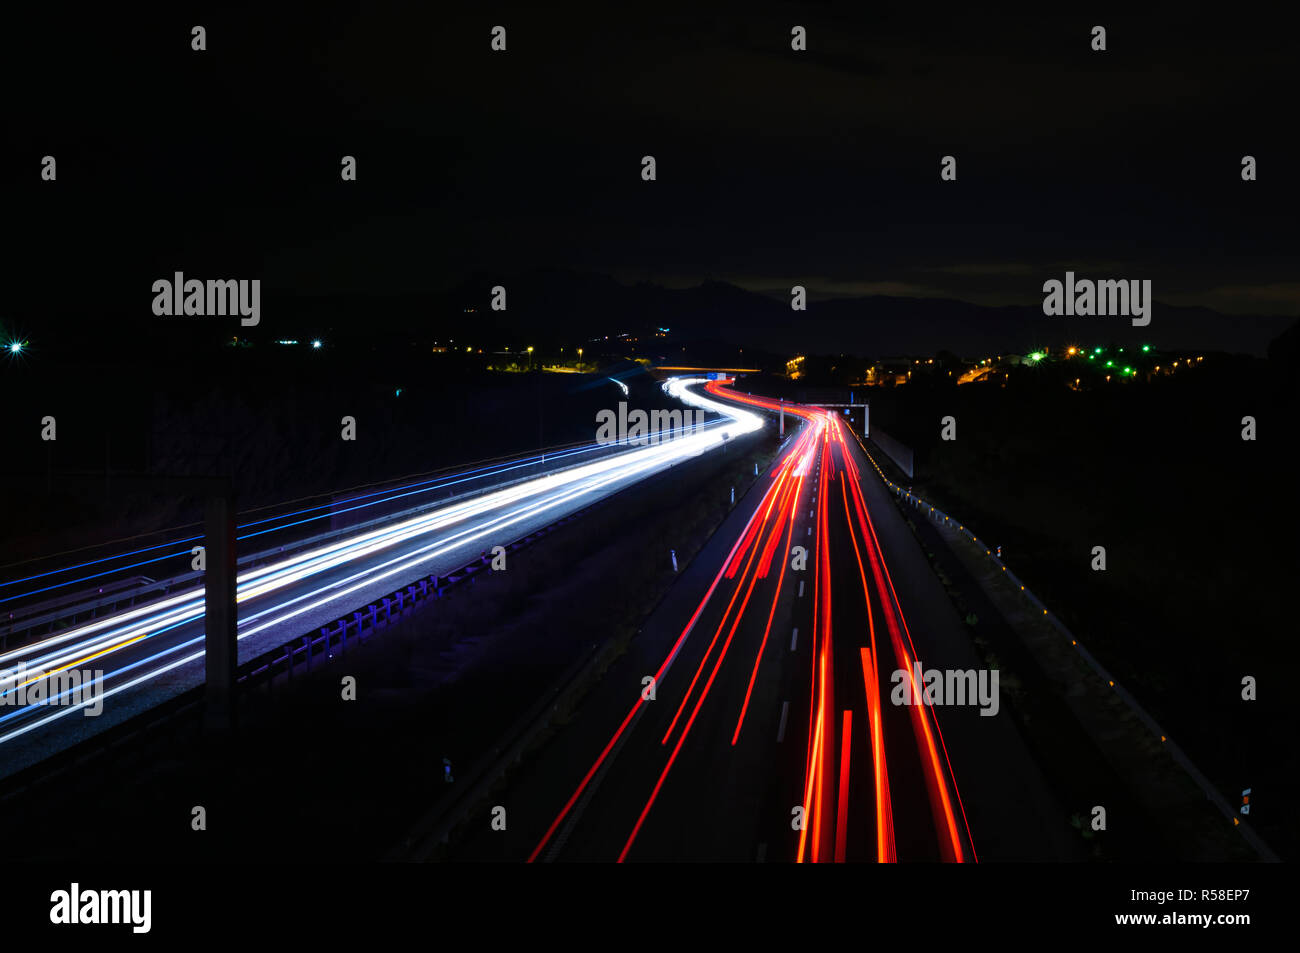 Car trails at night along a road and a city on the background Stock Photo